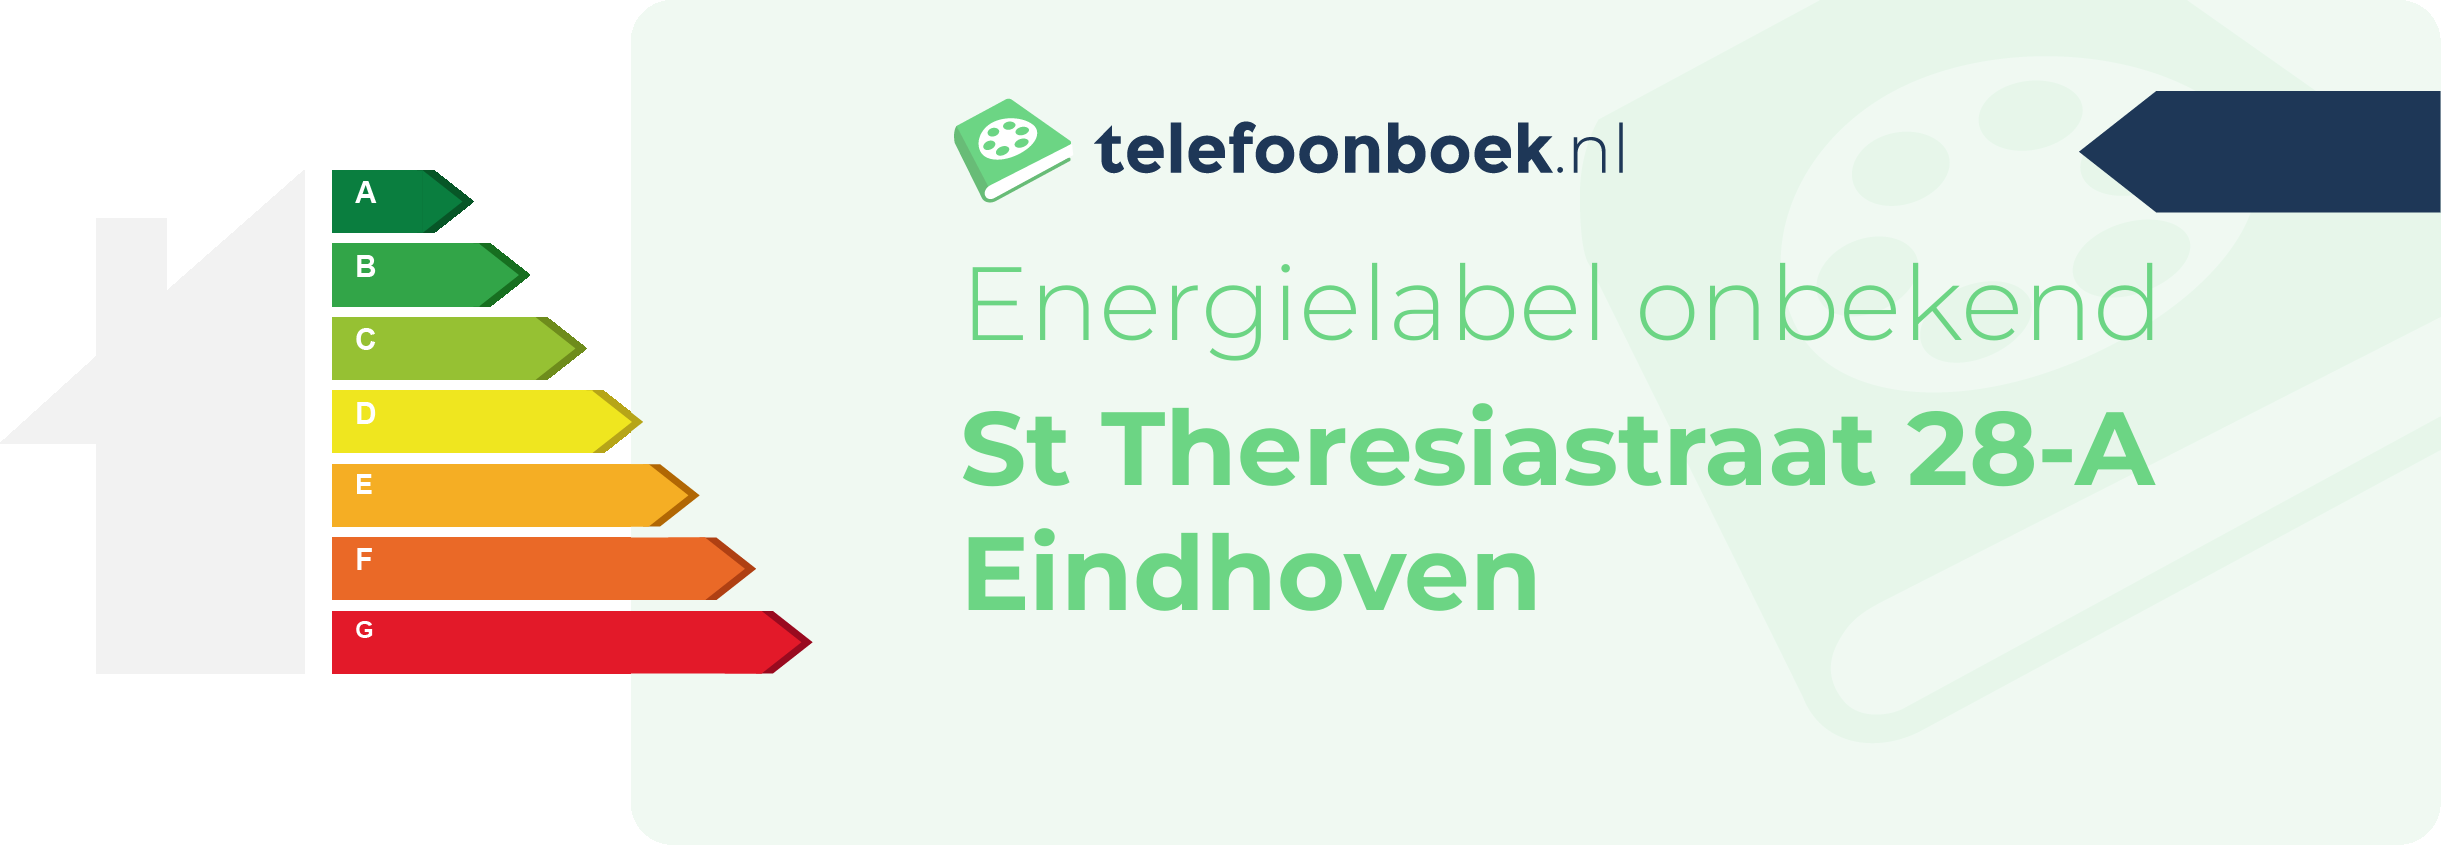 Energielabel St Theresiastraat 28-A Eindhoven